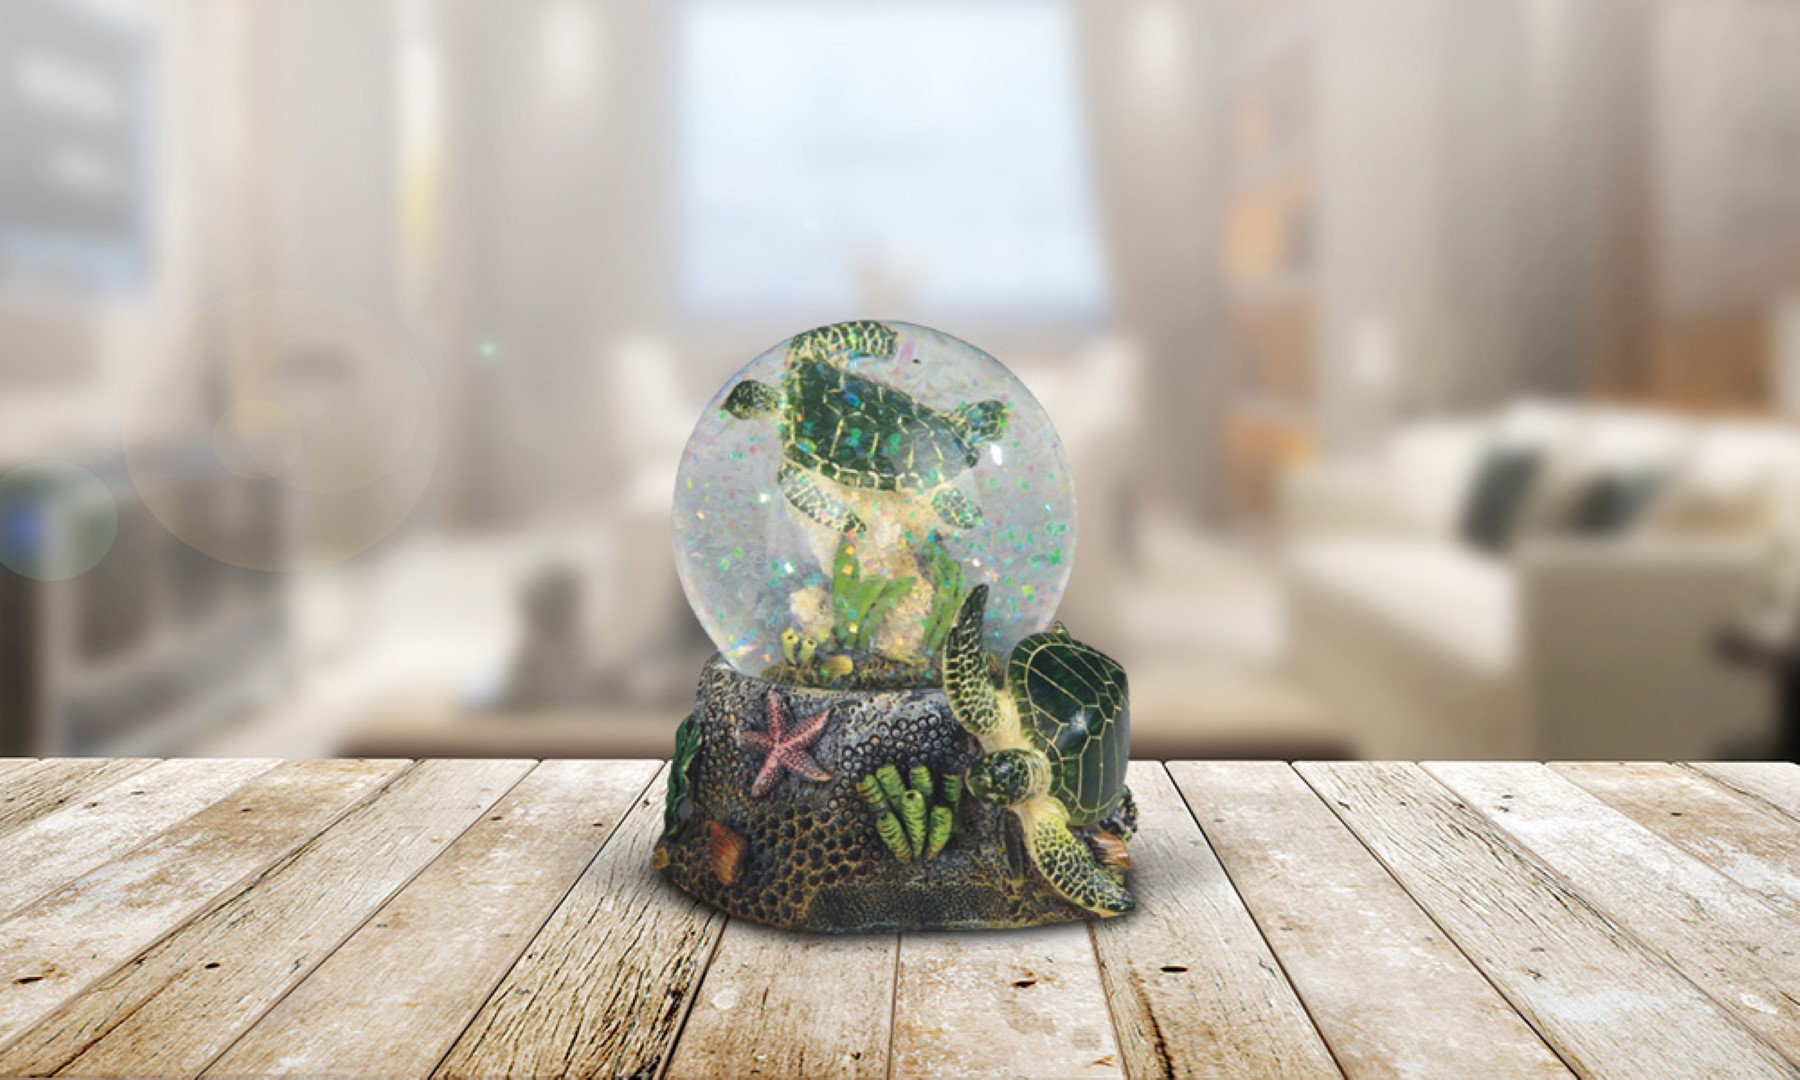 Water Globe - Pandas from Deluxebase. Panda Snow Globe with Resin Figurine  and Moulded Base. Great Home Globe Decor, Ornaments and Gifts. : Amazon.in:  Toys & Games